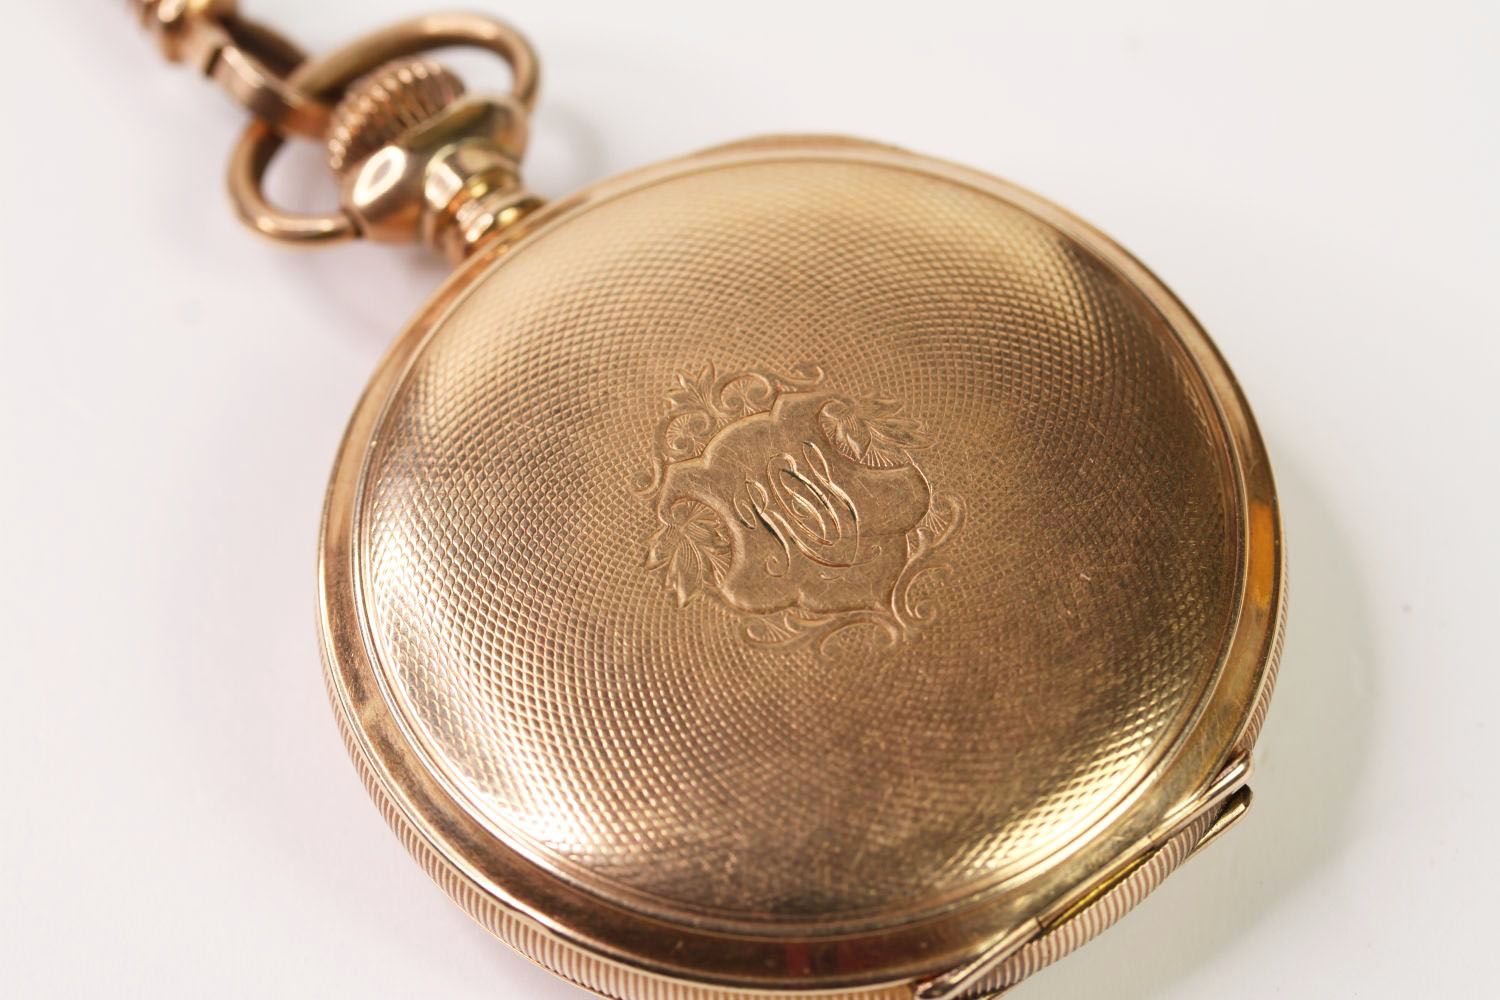 WALTHAM WATCH CO GOLD POCKET WATCH WITH CHAIN, circular white dial with roman numeral hour - Image 2 of 6